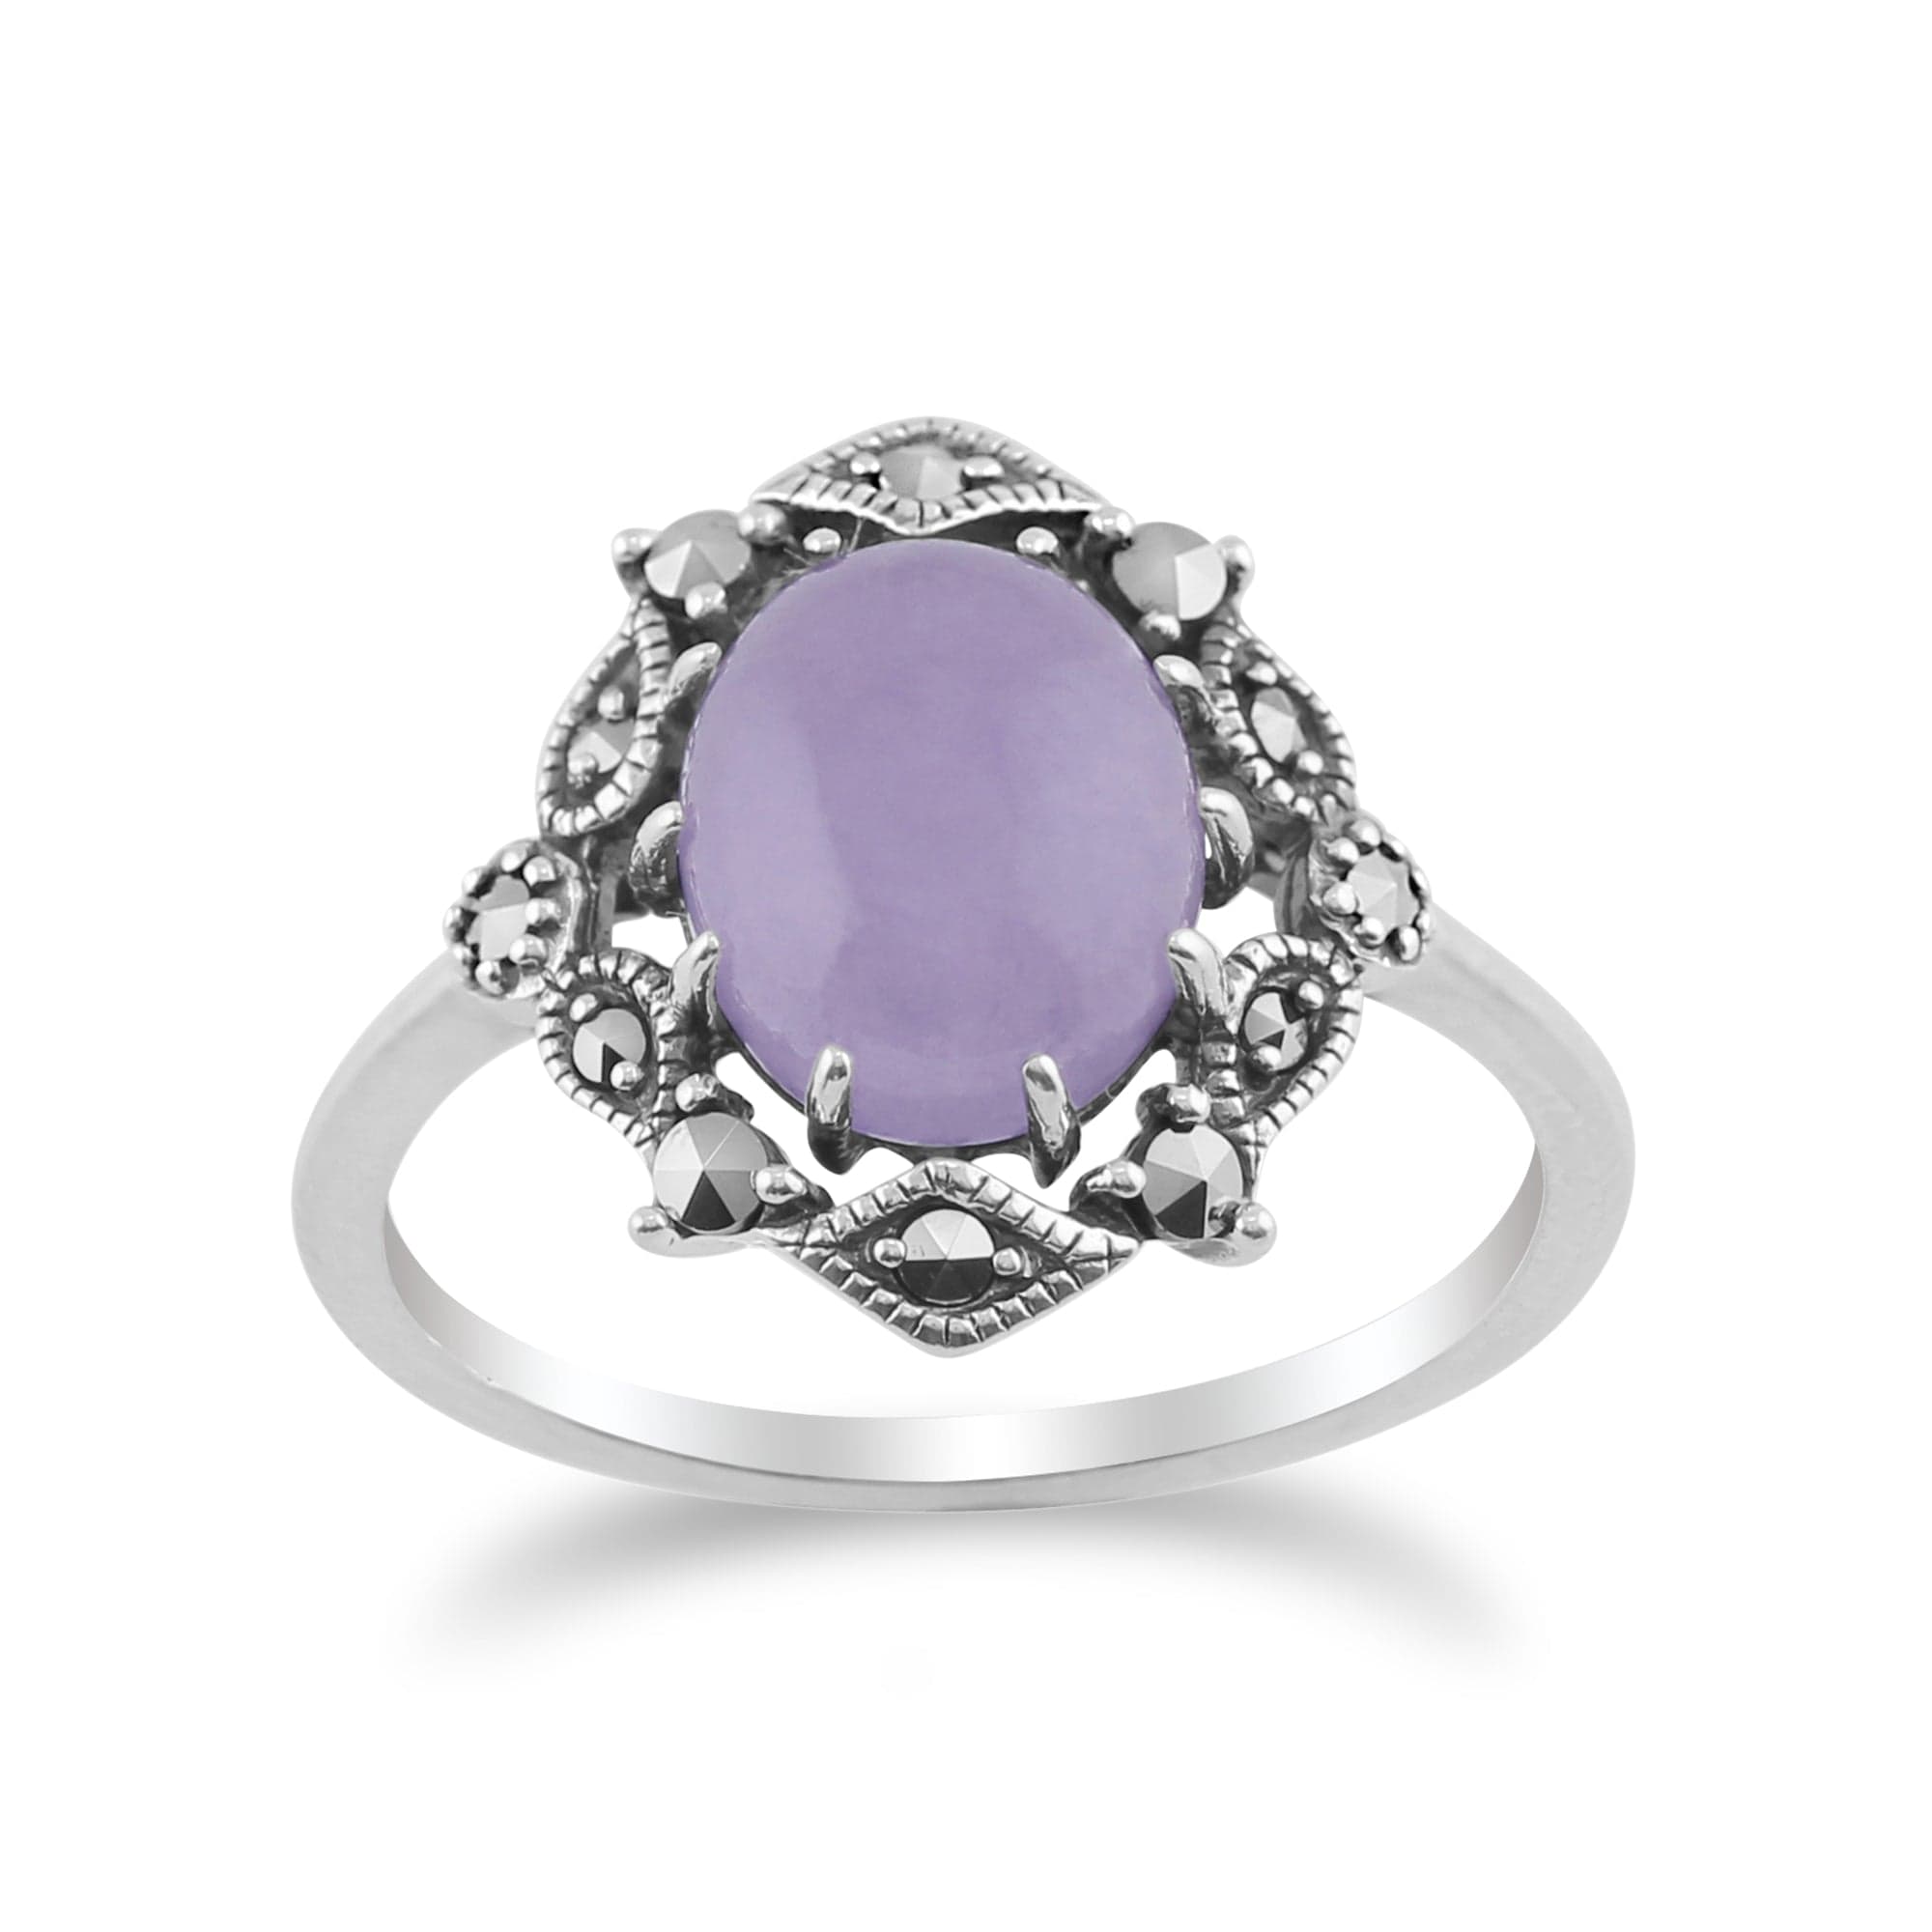 Art Nouveau Style Oval Lavender Jade Cabochon & Marcasite Statement Ring in 925 Sterling Silver - Gemondo